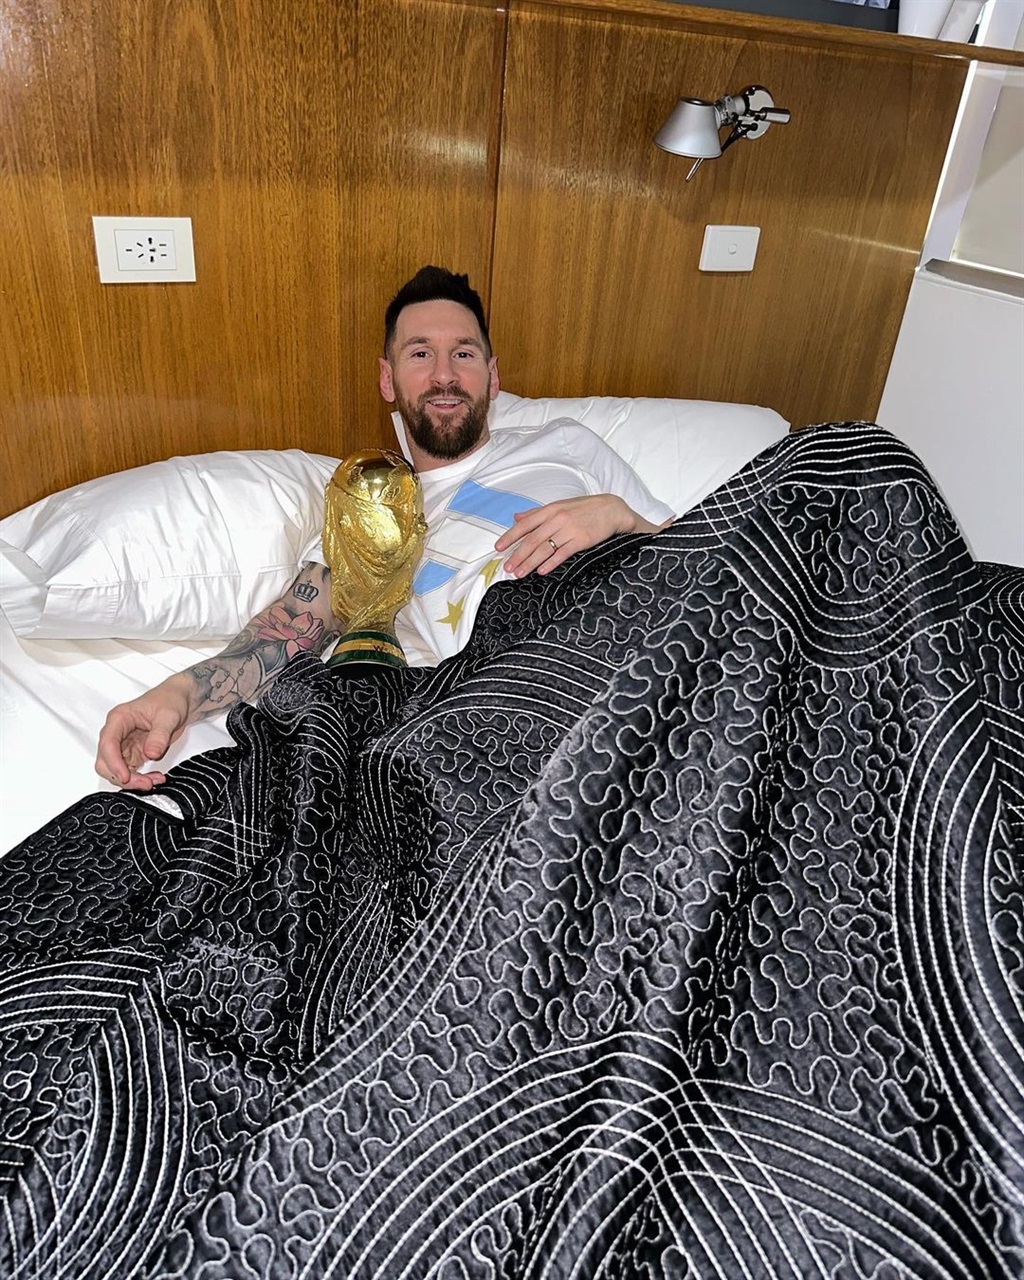 Lionel Messi officially has the most liked Instagr